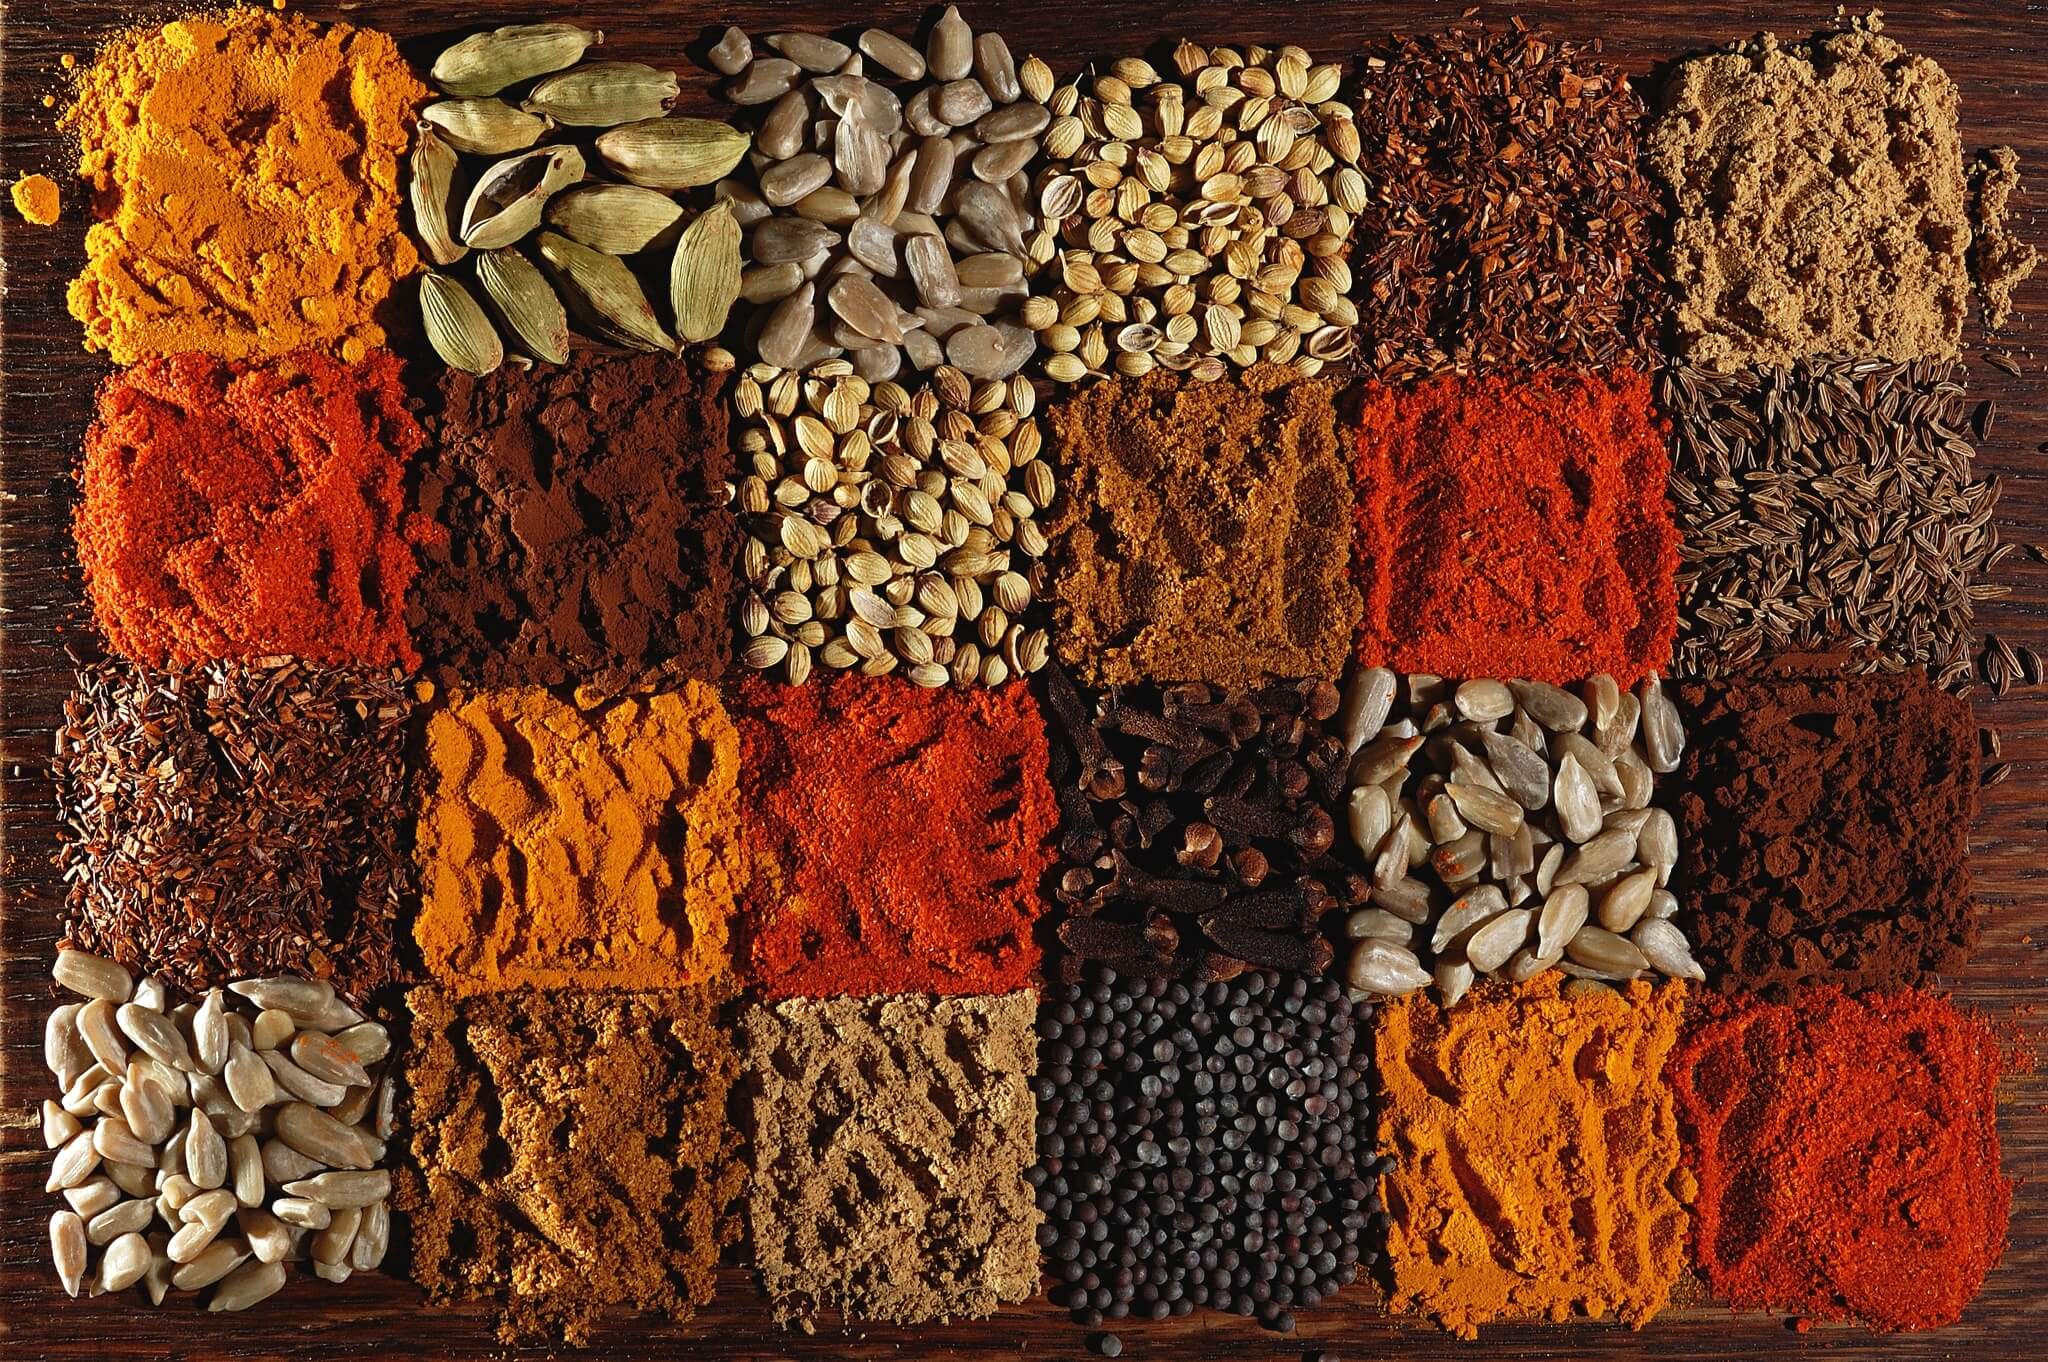 Bulk Spices | Wholesale Spices in Bulk | Spices for Sale